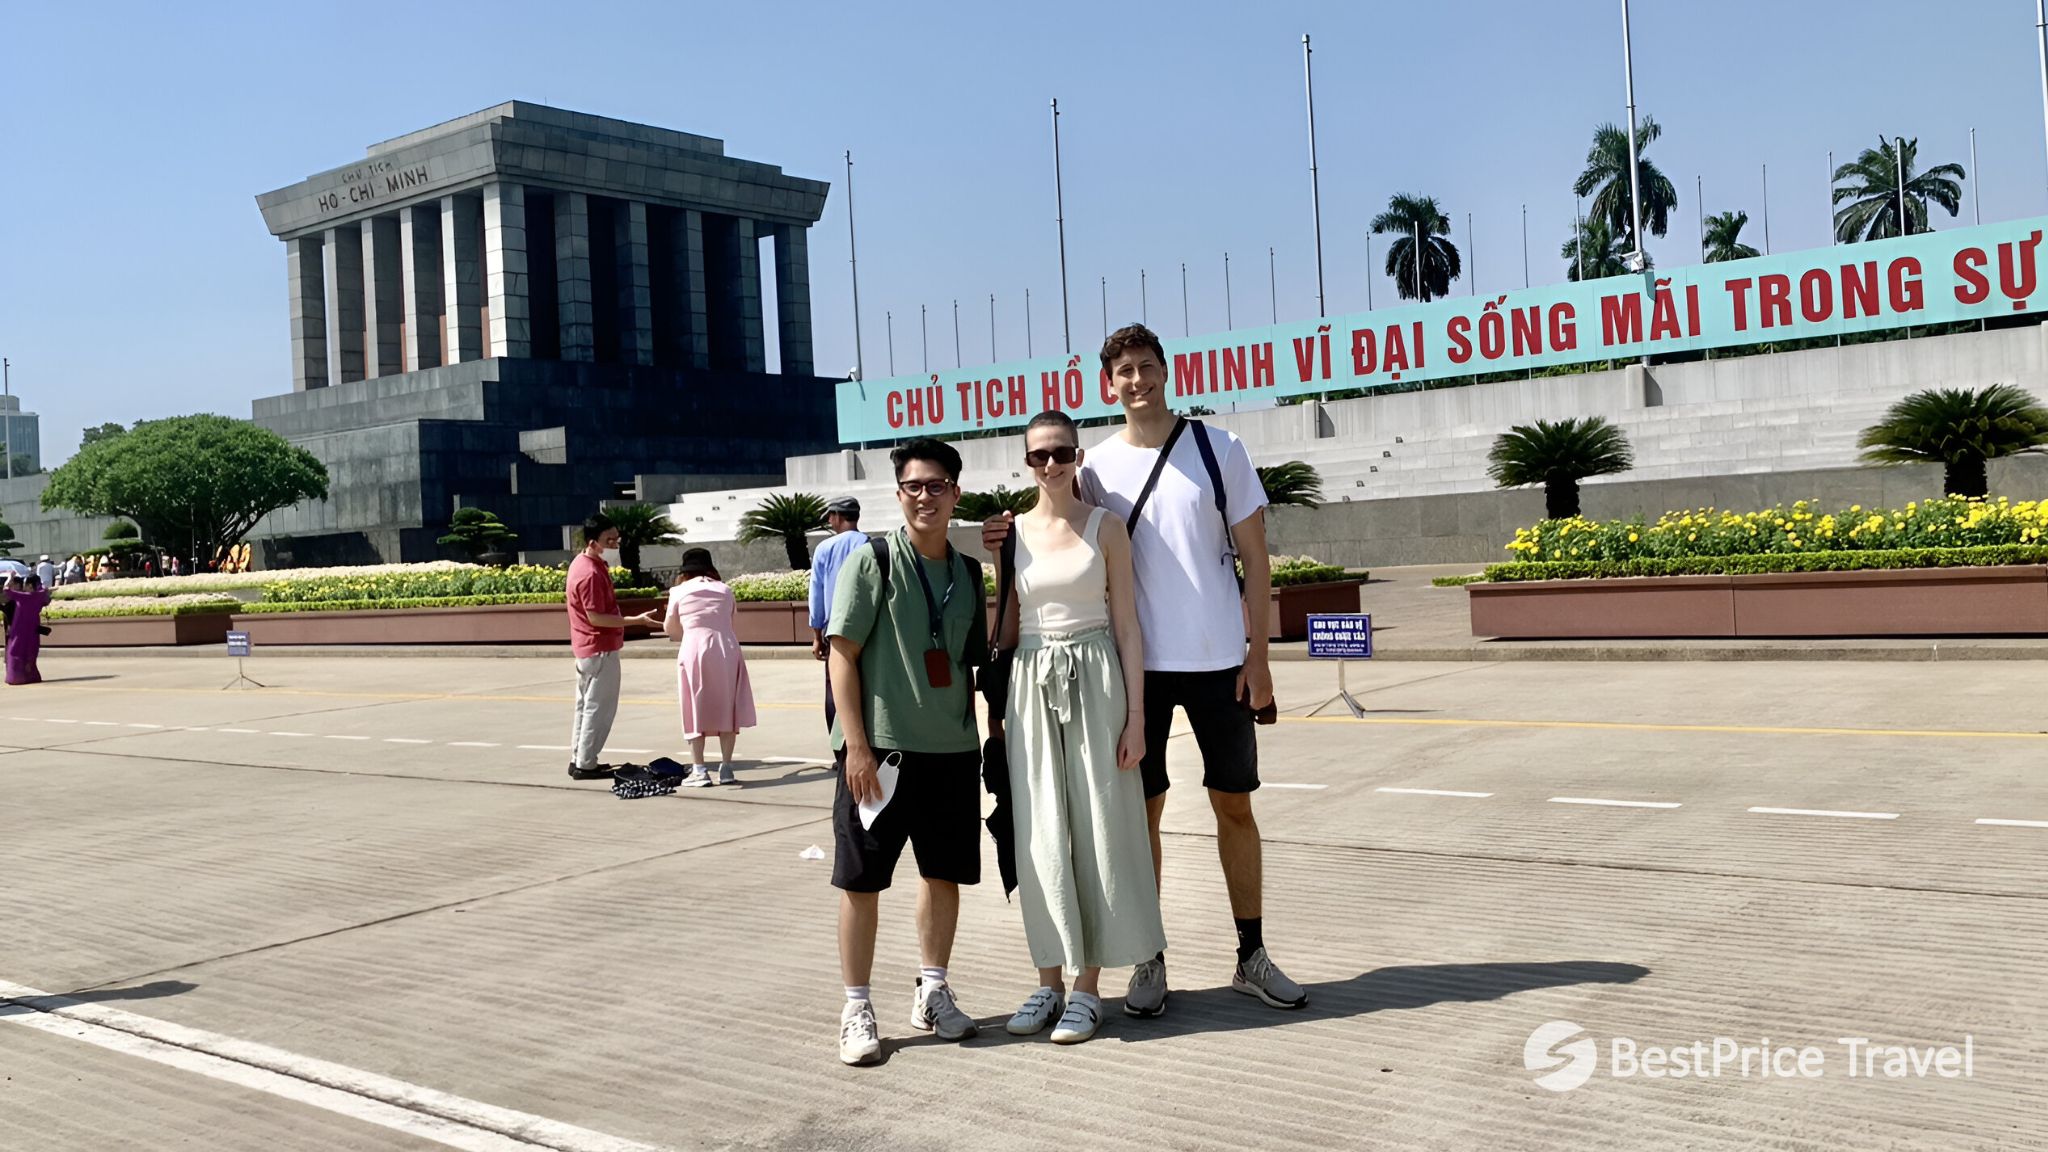 Day 2 Ho Chi Minh Mausoleum Is Highly Renowned Among All Travelers To Hanoi